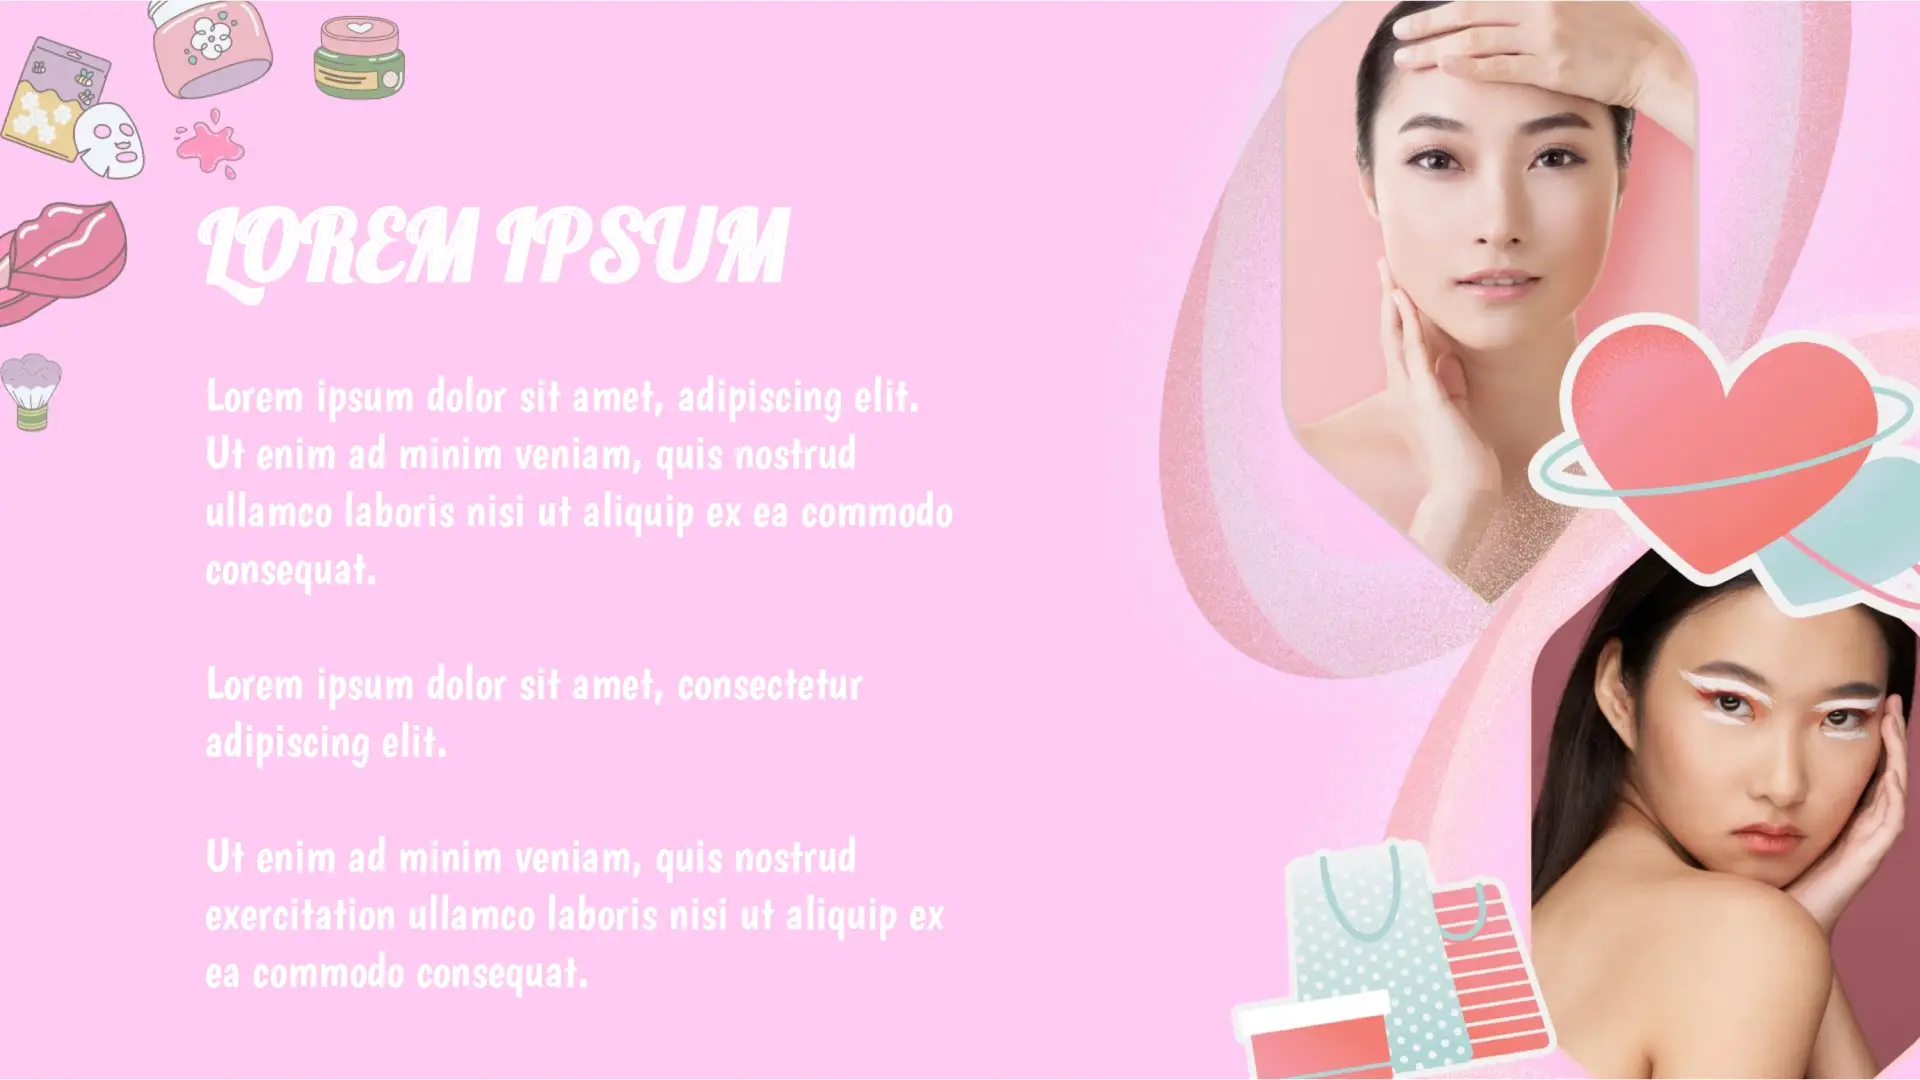 Korean Beauty Product page 4 Template for Google Slides